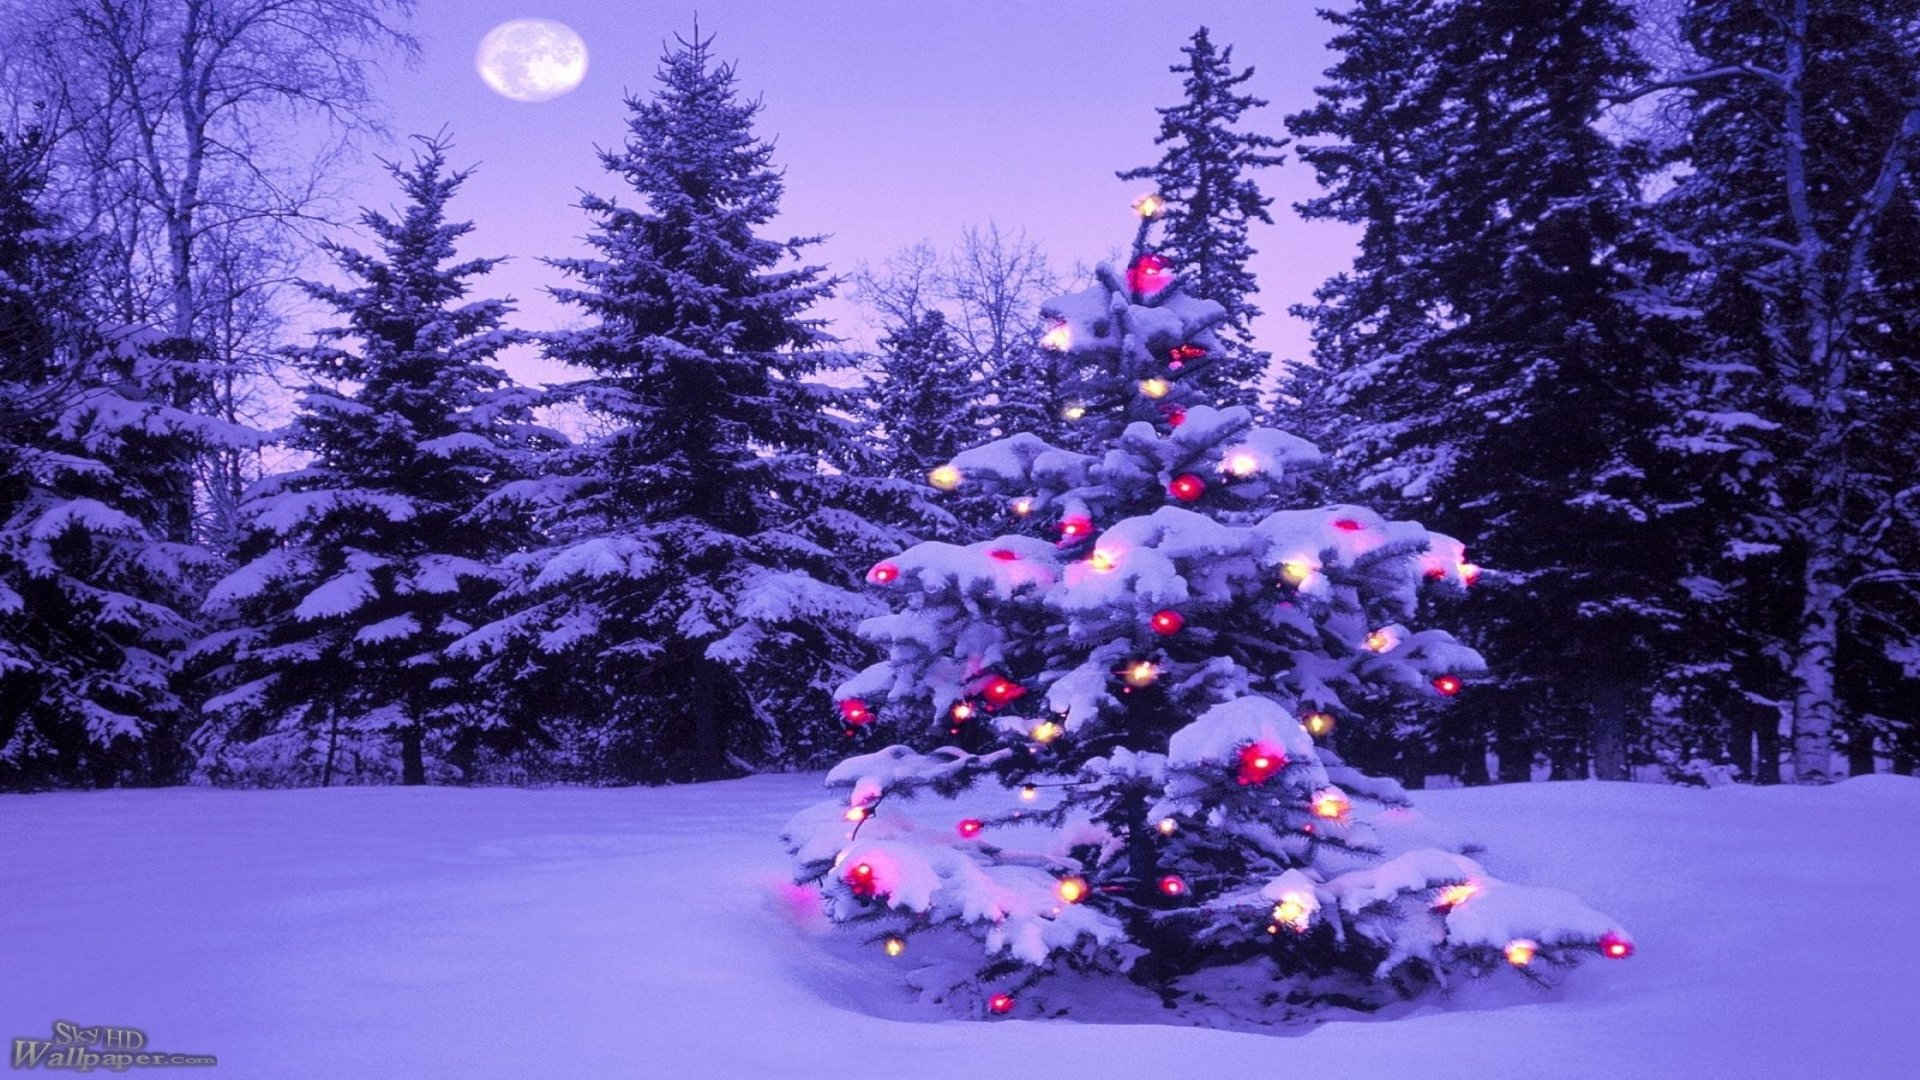 Lighted Christmas Tree in Winter Forest HD Wallpaper Background